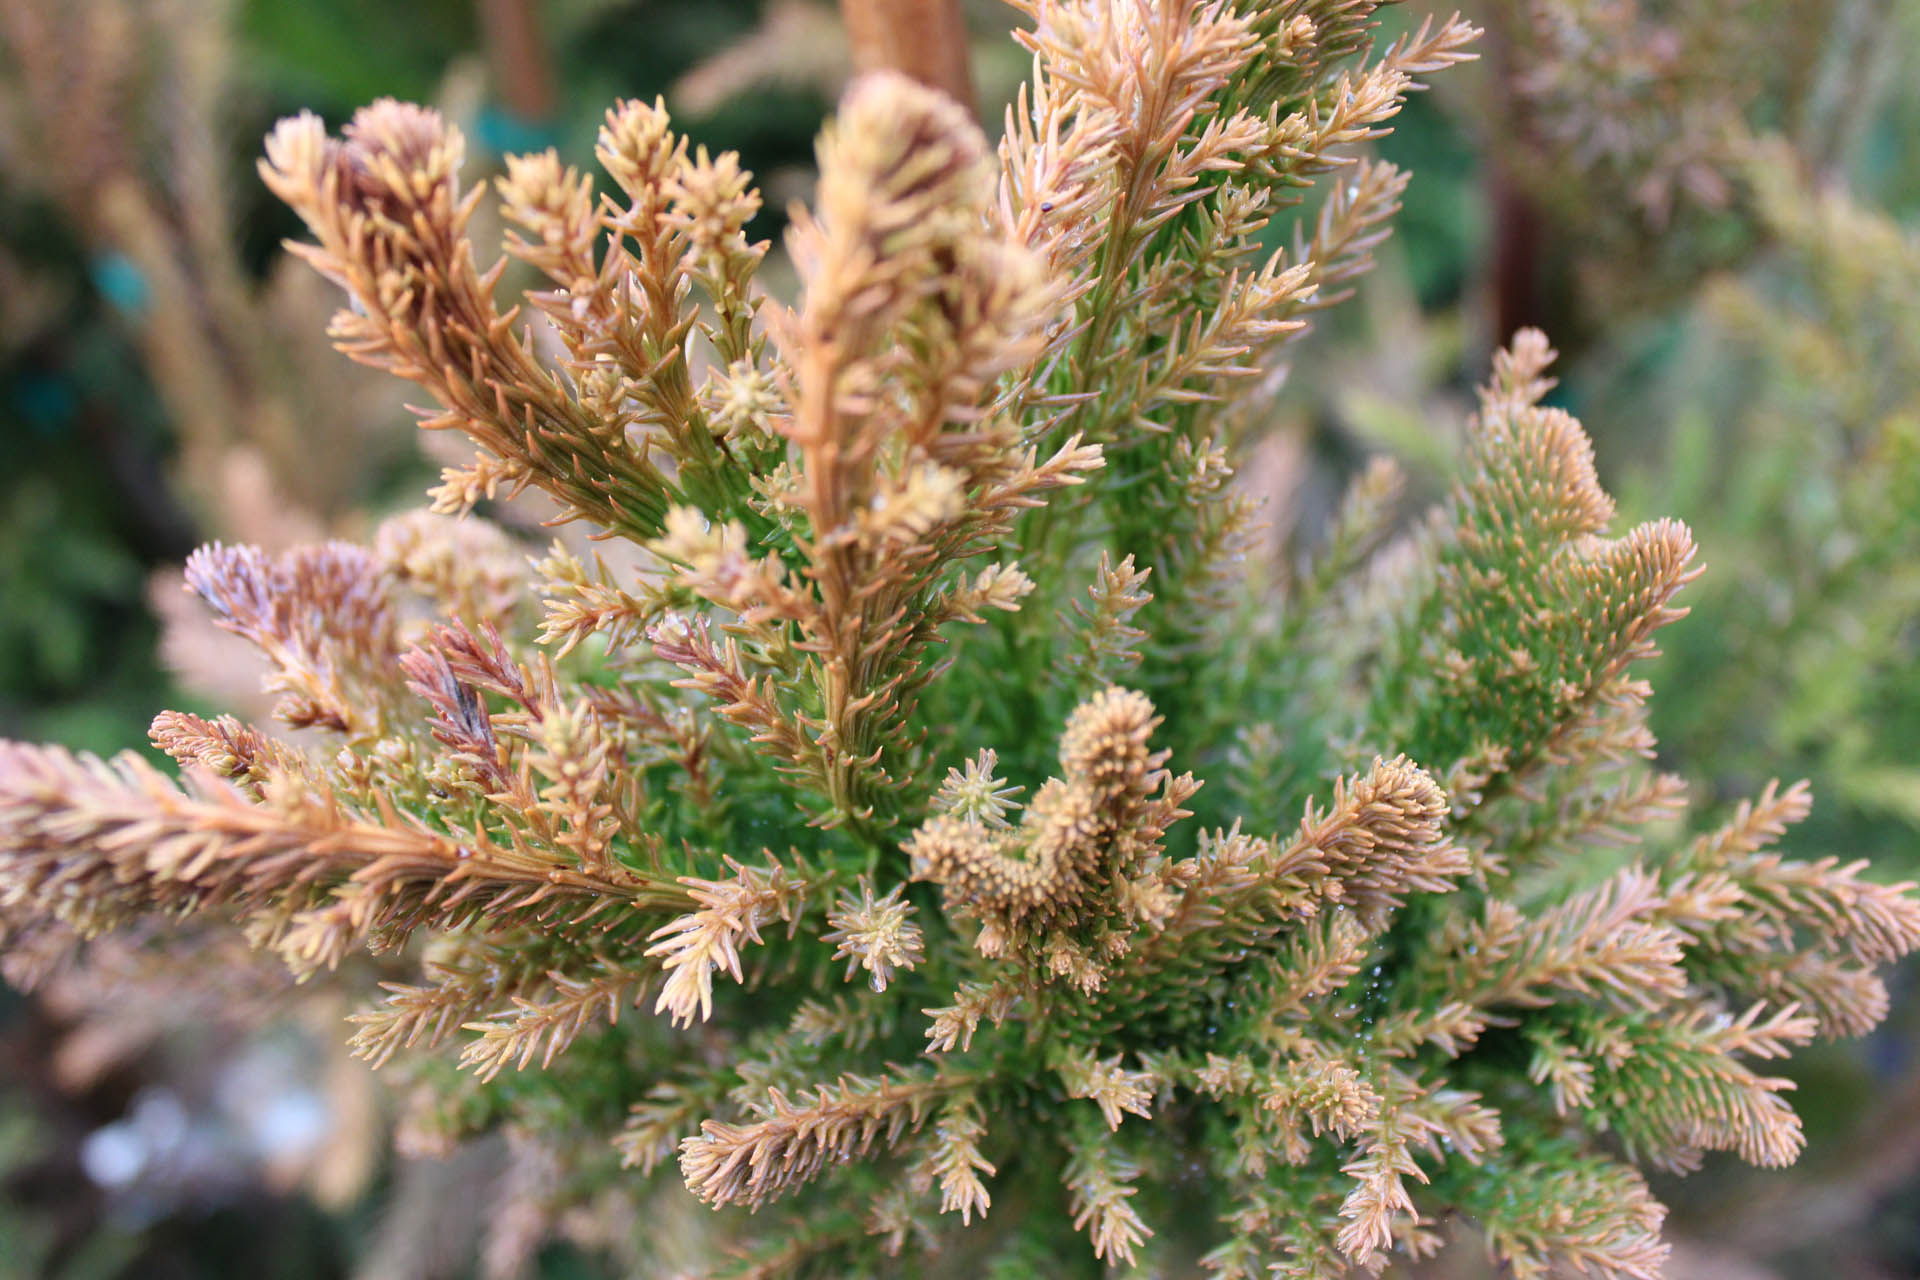 cryptomeria growth rate in winters